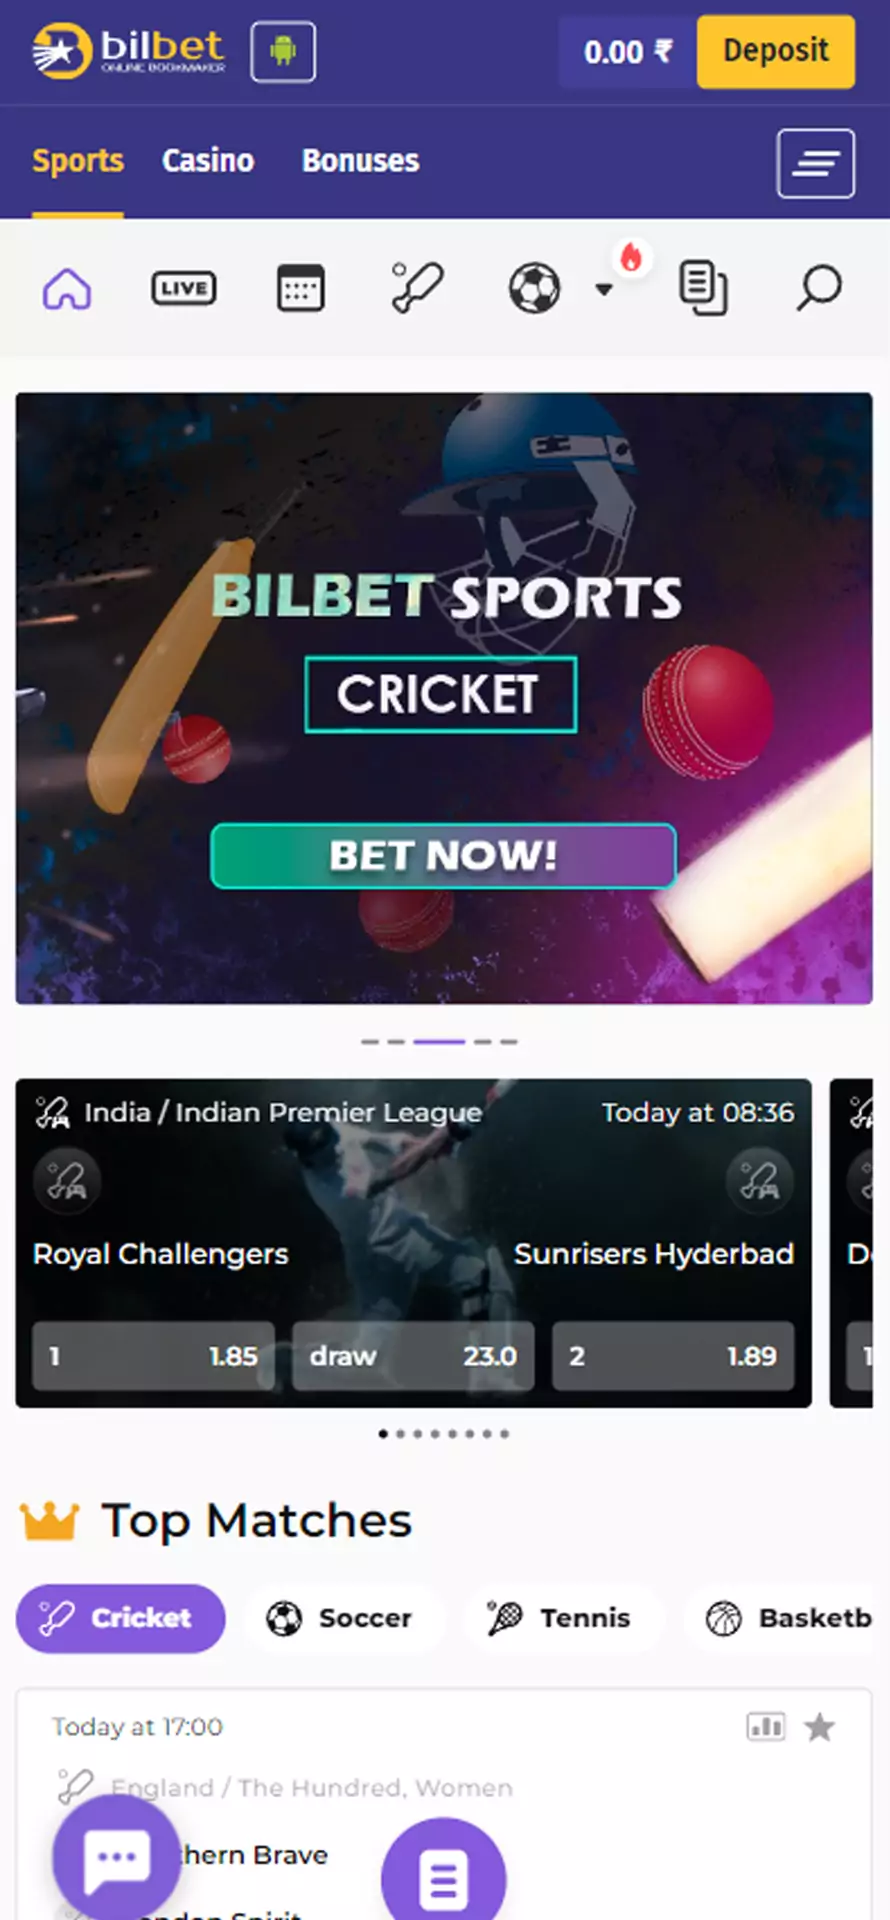 Bilbet has various sports to bet on.